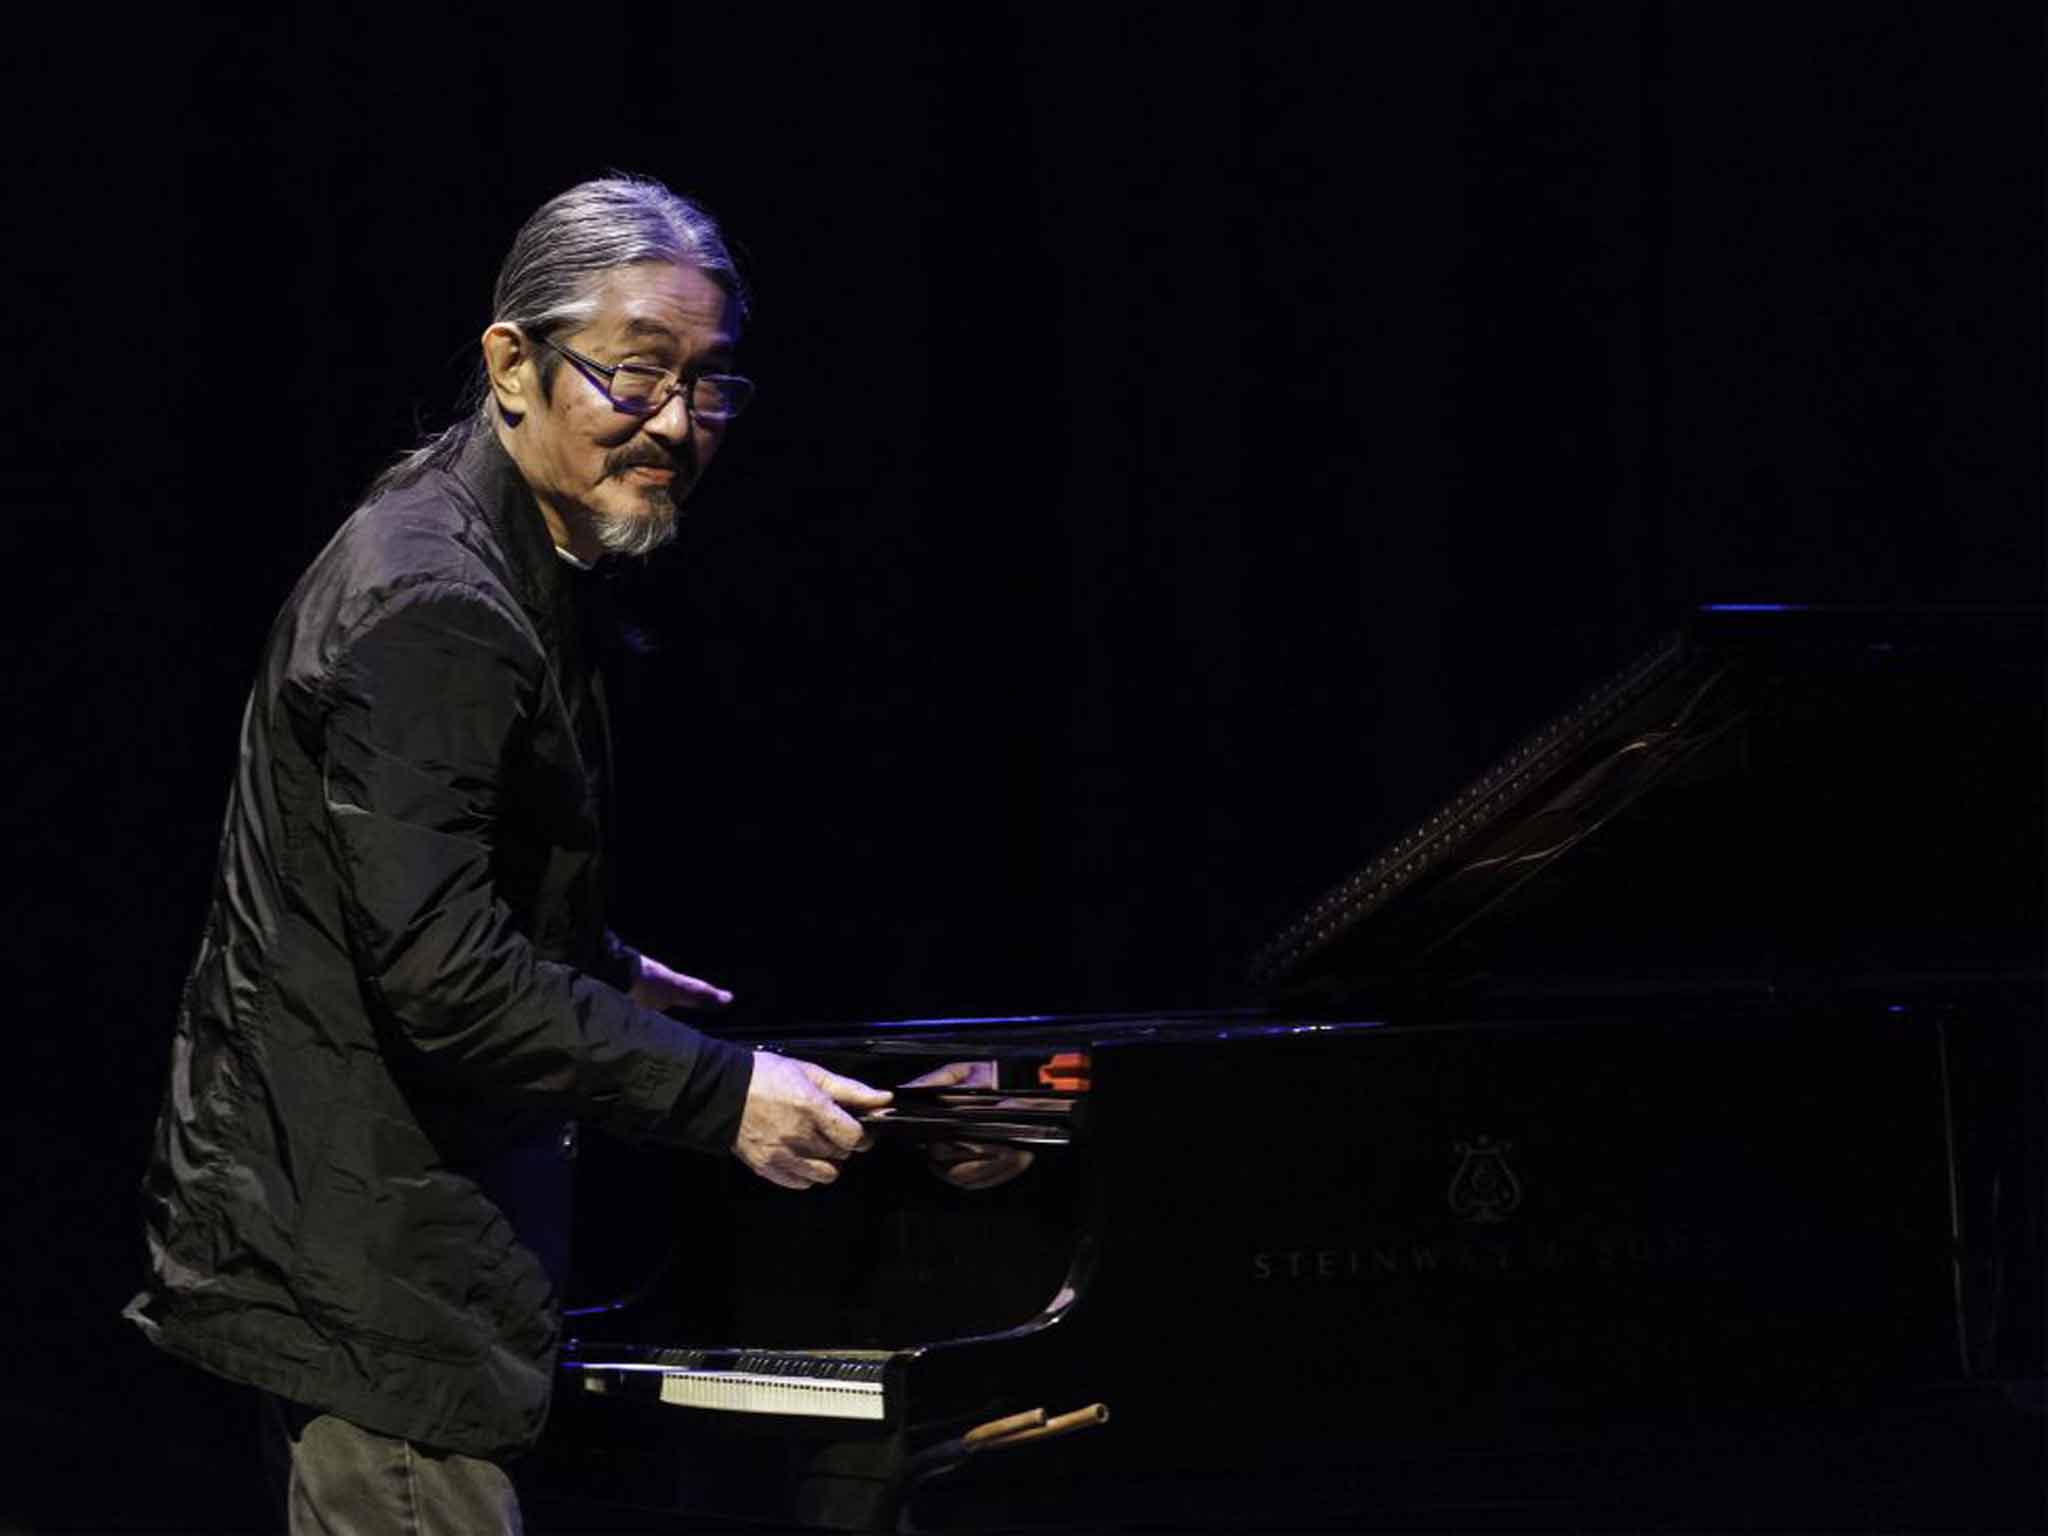 Kikuchi in 2013, performing at a tribute concert for his former collaborator, Paul Motian